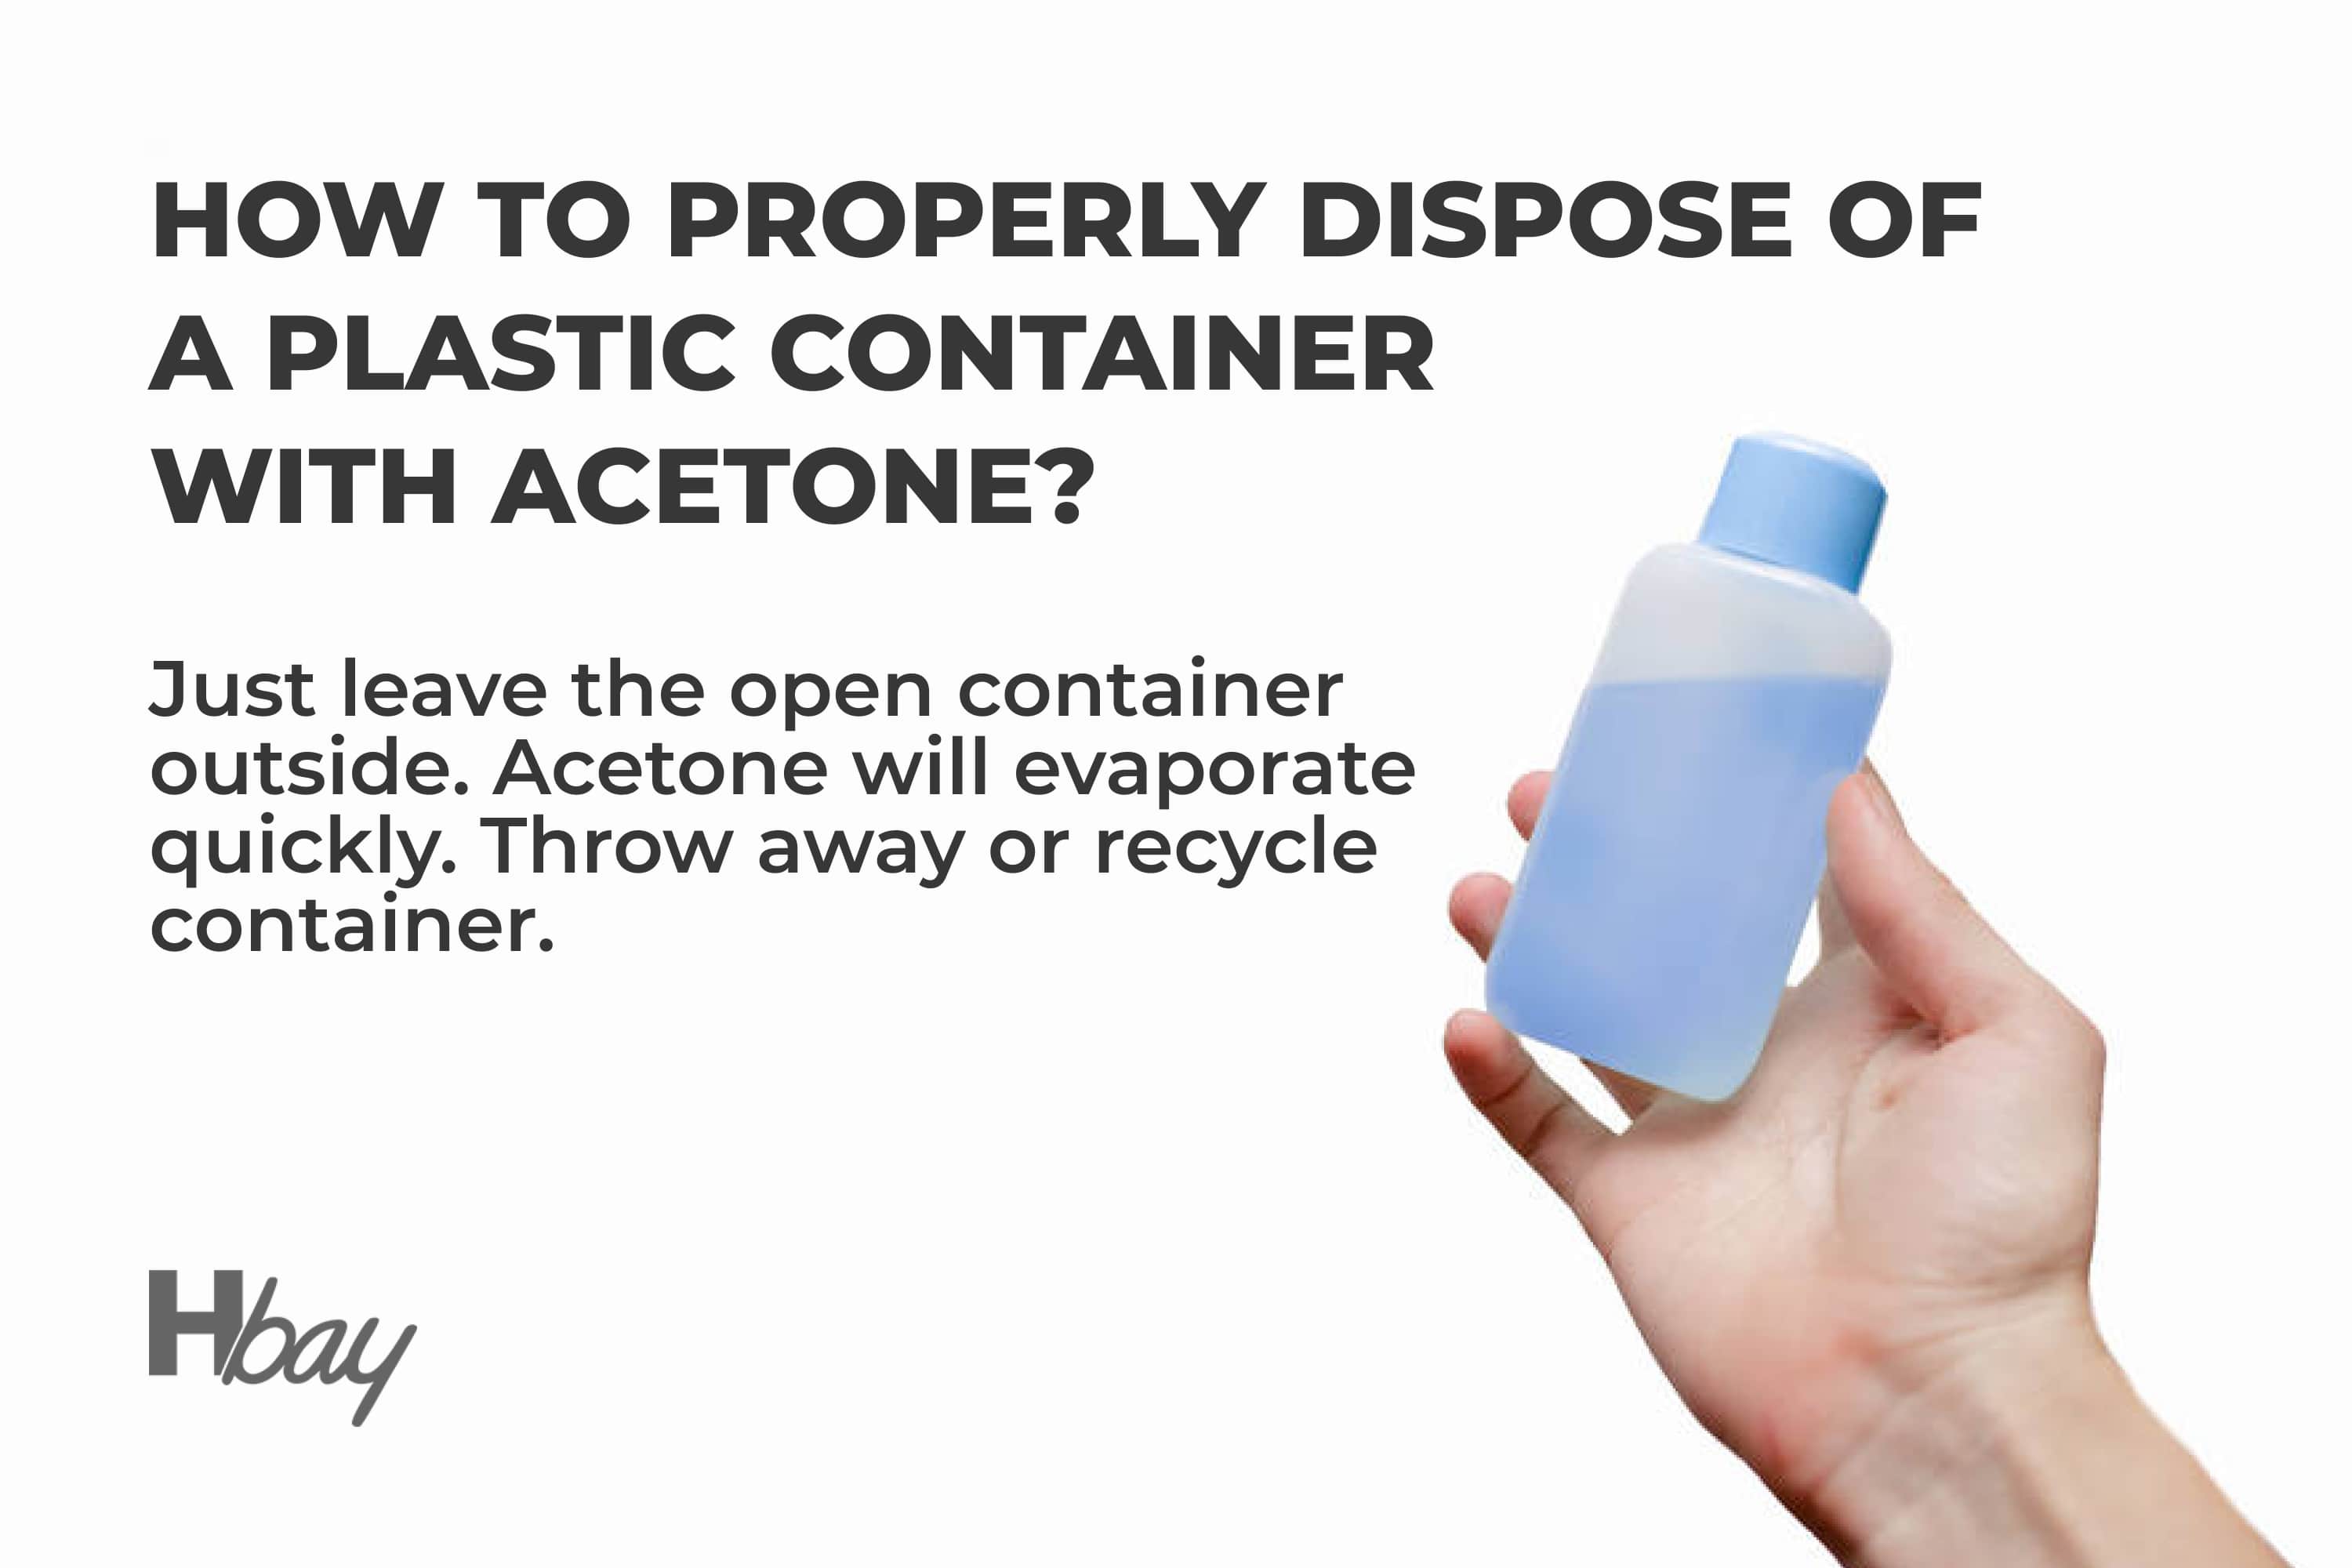 How to properly dispose of a plastic container with acetone